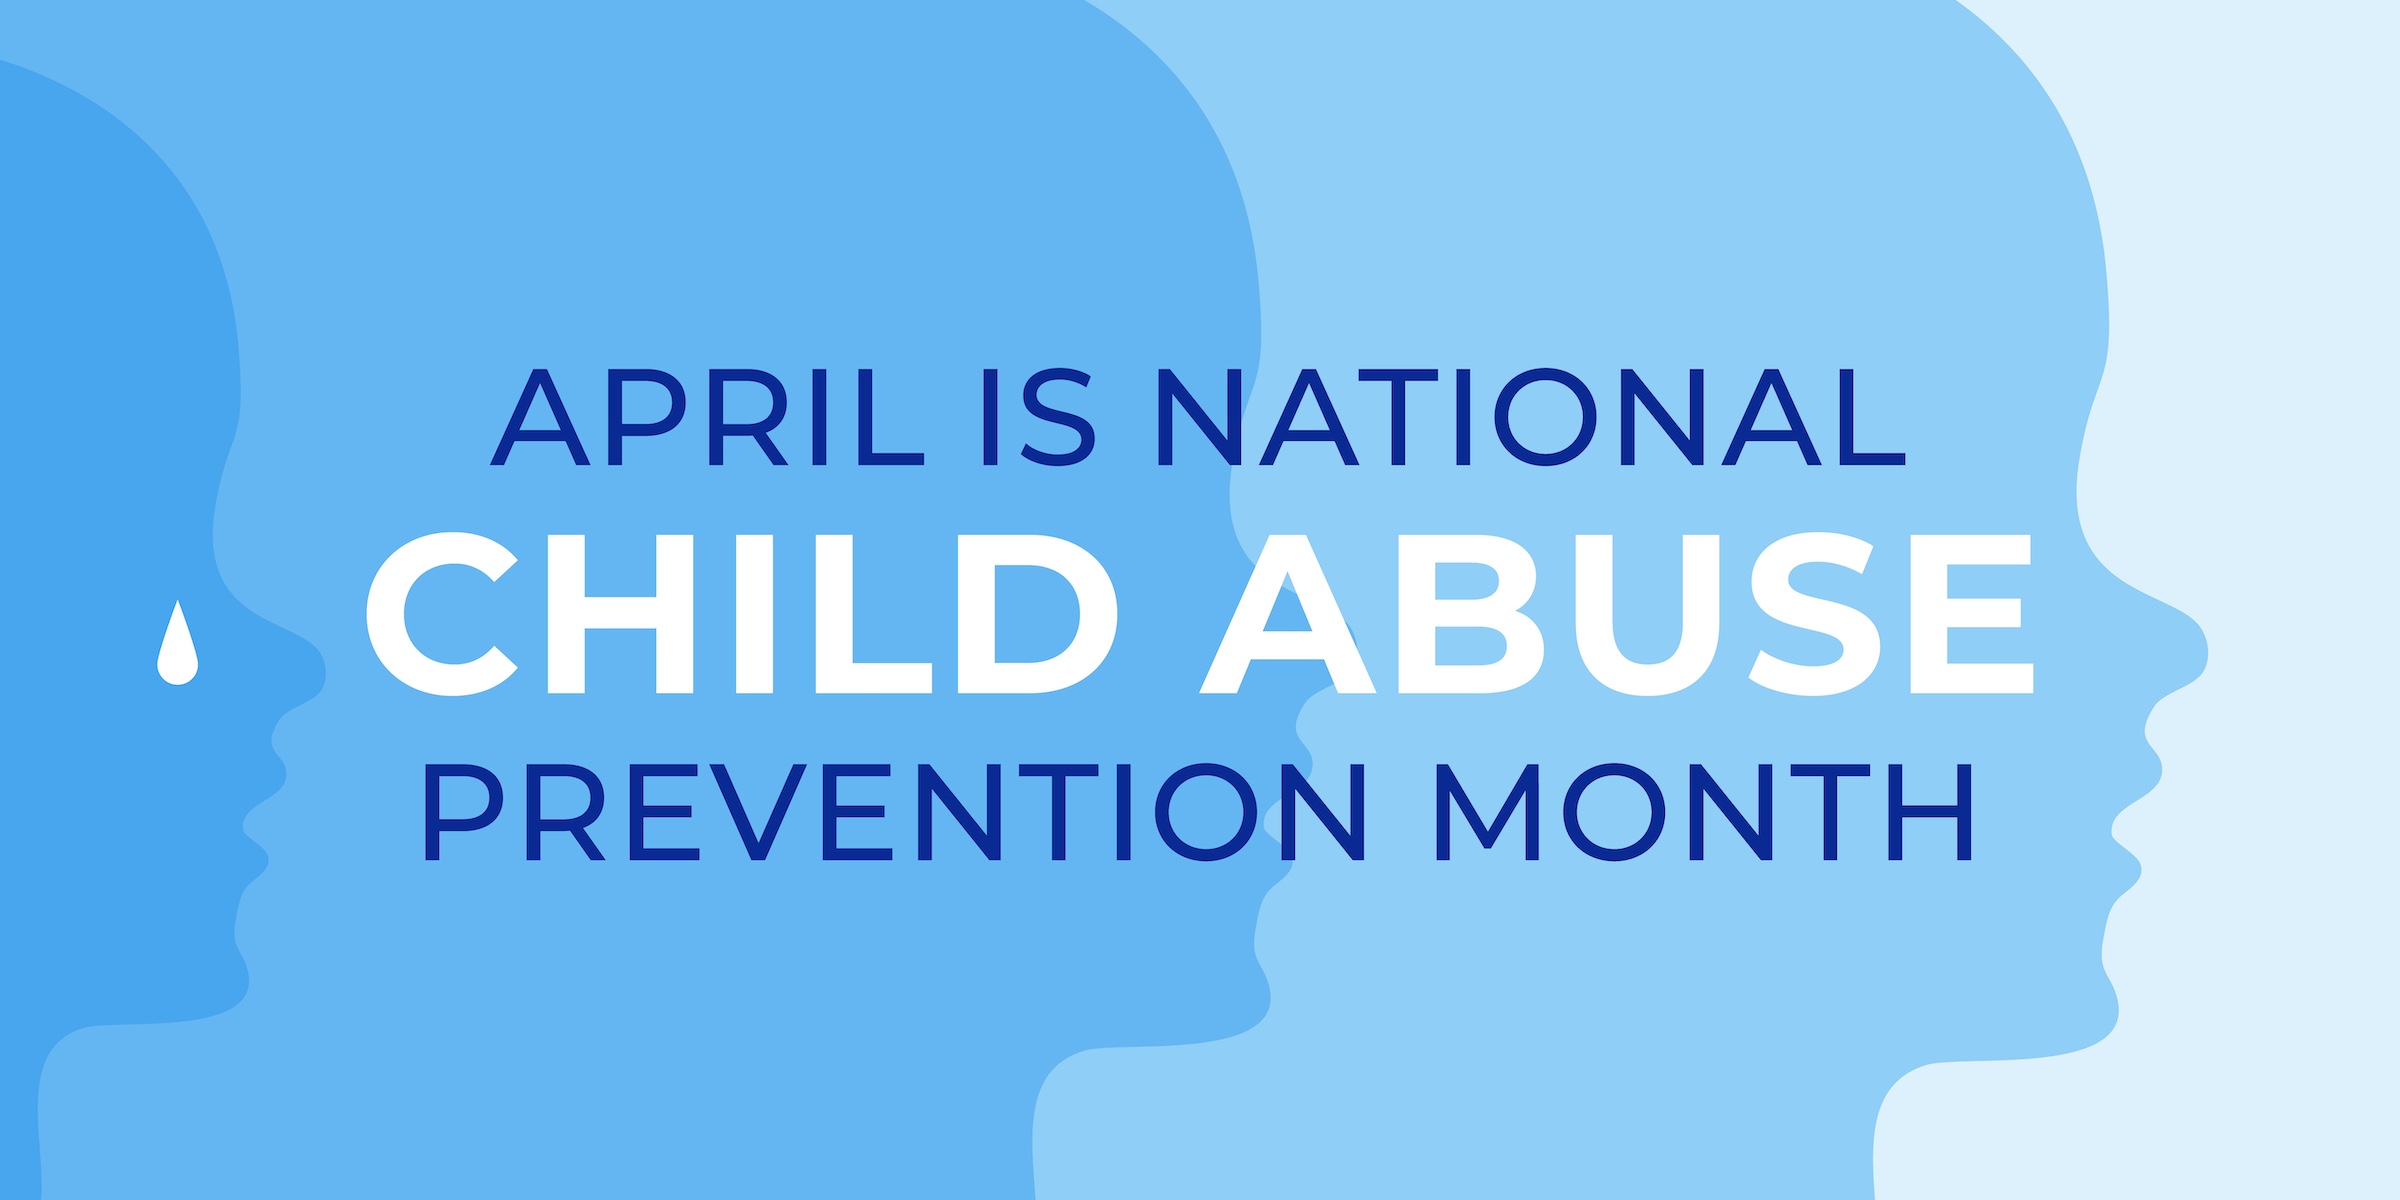 National Child Abuse Prevention Month banner design template. Celebrate annual in April in United States. Silhouette of child with tear. Concept of children protection and safety